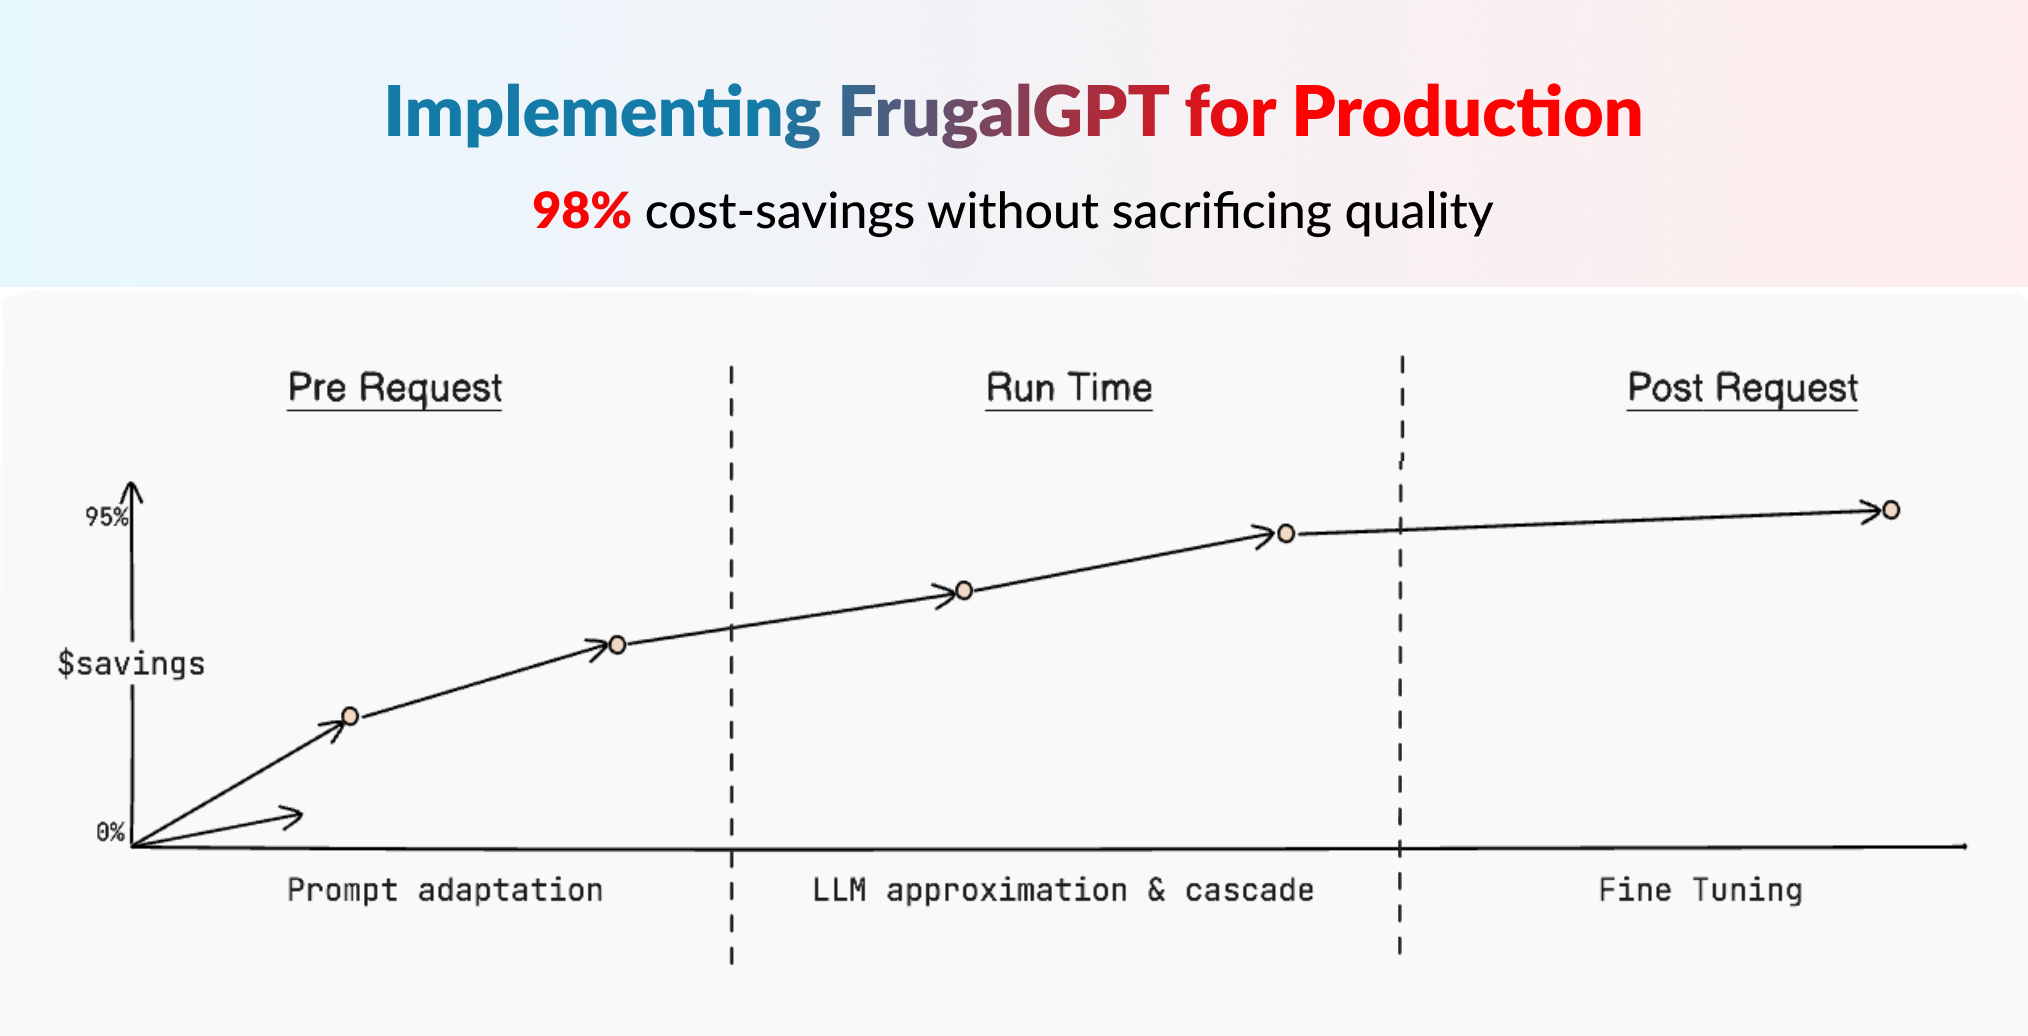 Implementing FrugalGPT: Reducing LLM Costs and Improving Performance